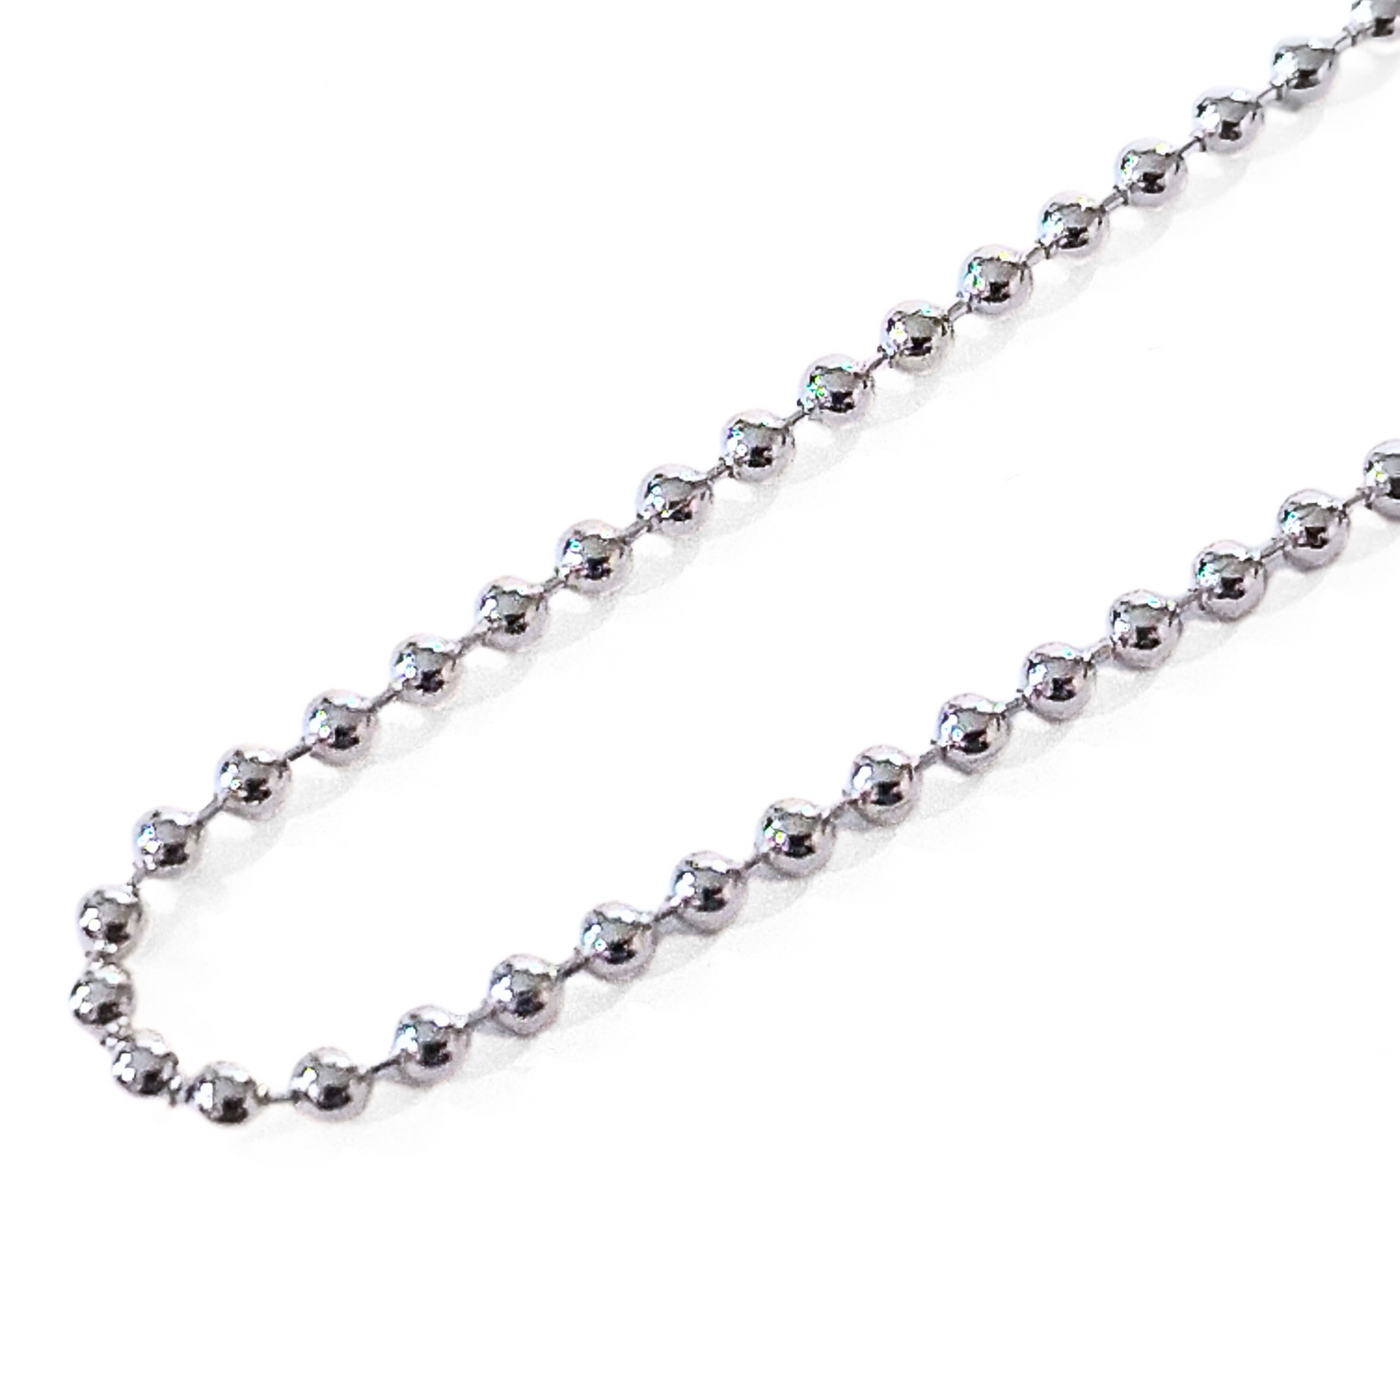 18" 2.0mm Beaded Chain (Sterling Silver)